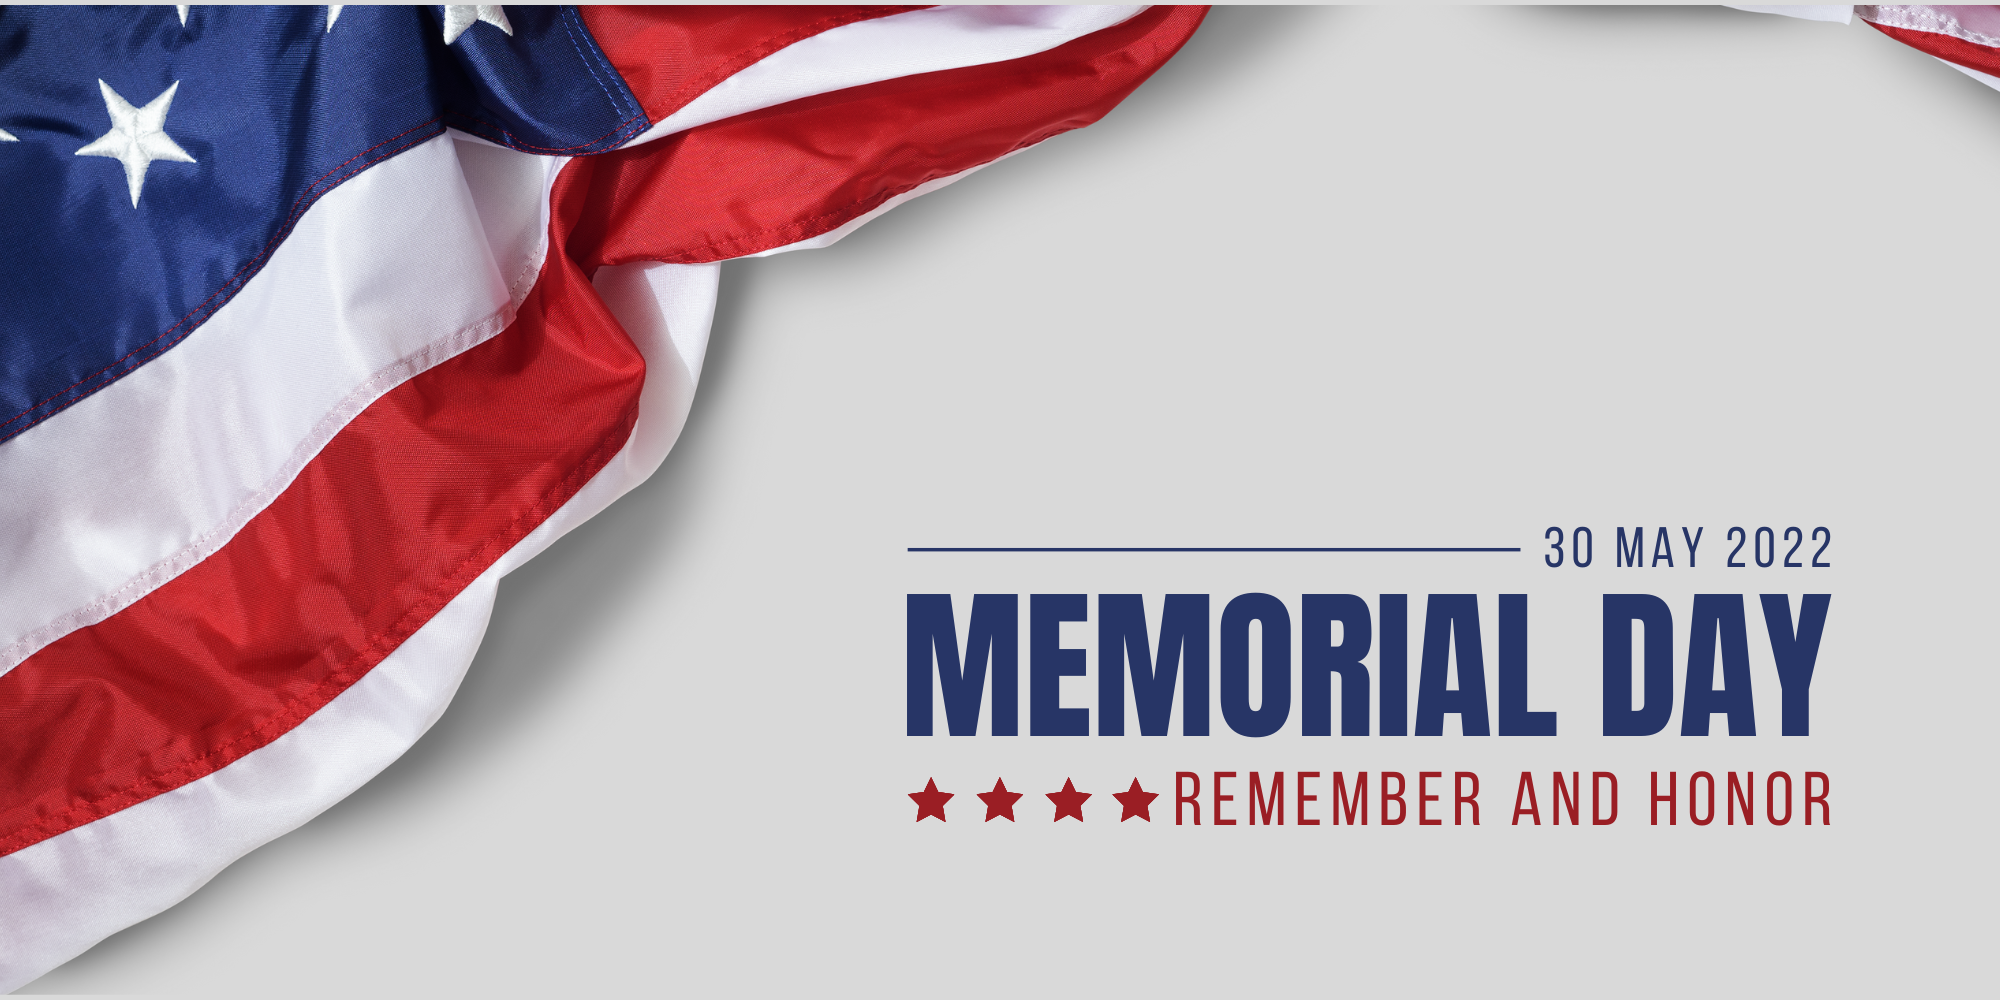 Administrative Offices closed for Memorial Day Town of Fairfax